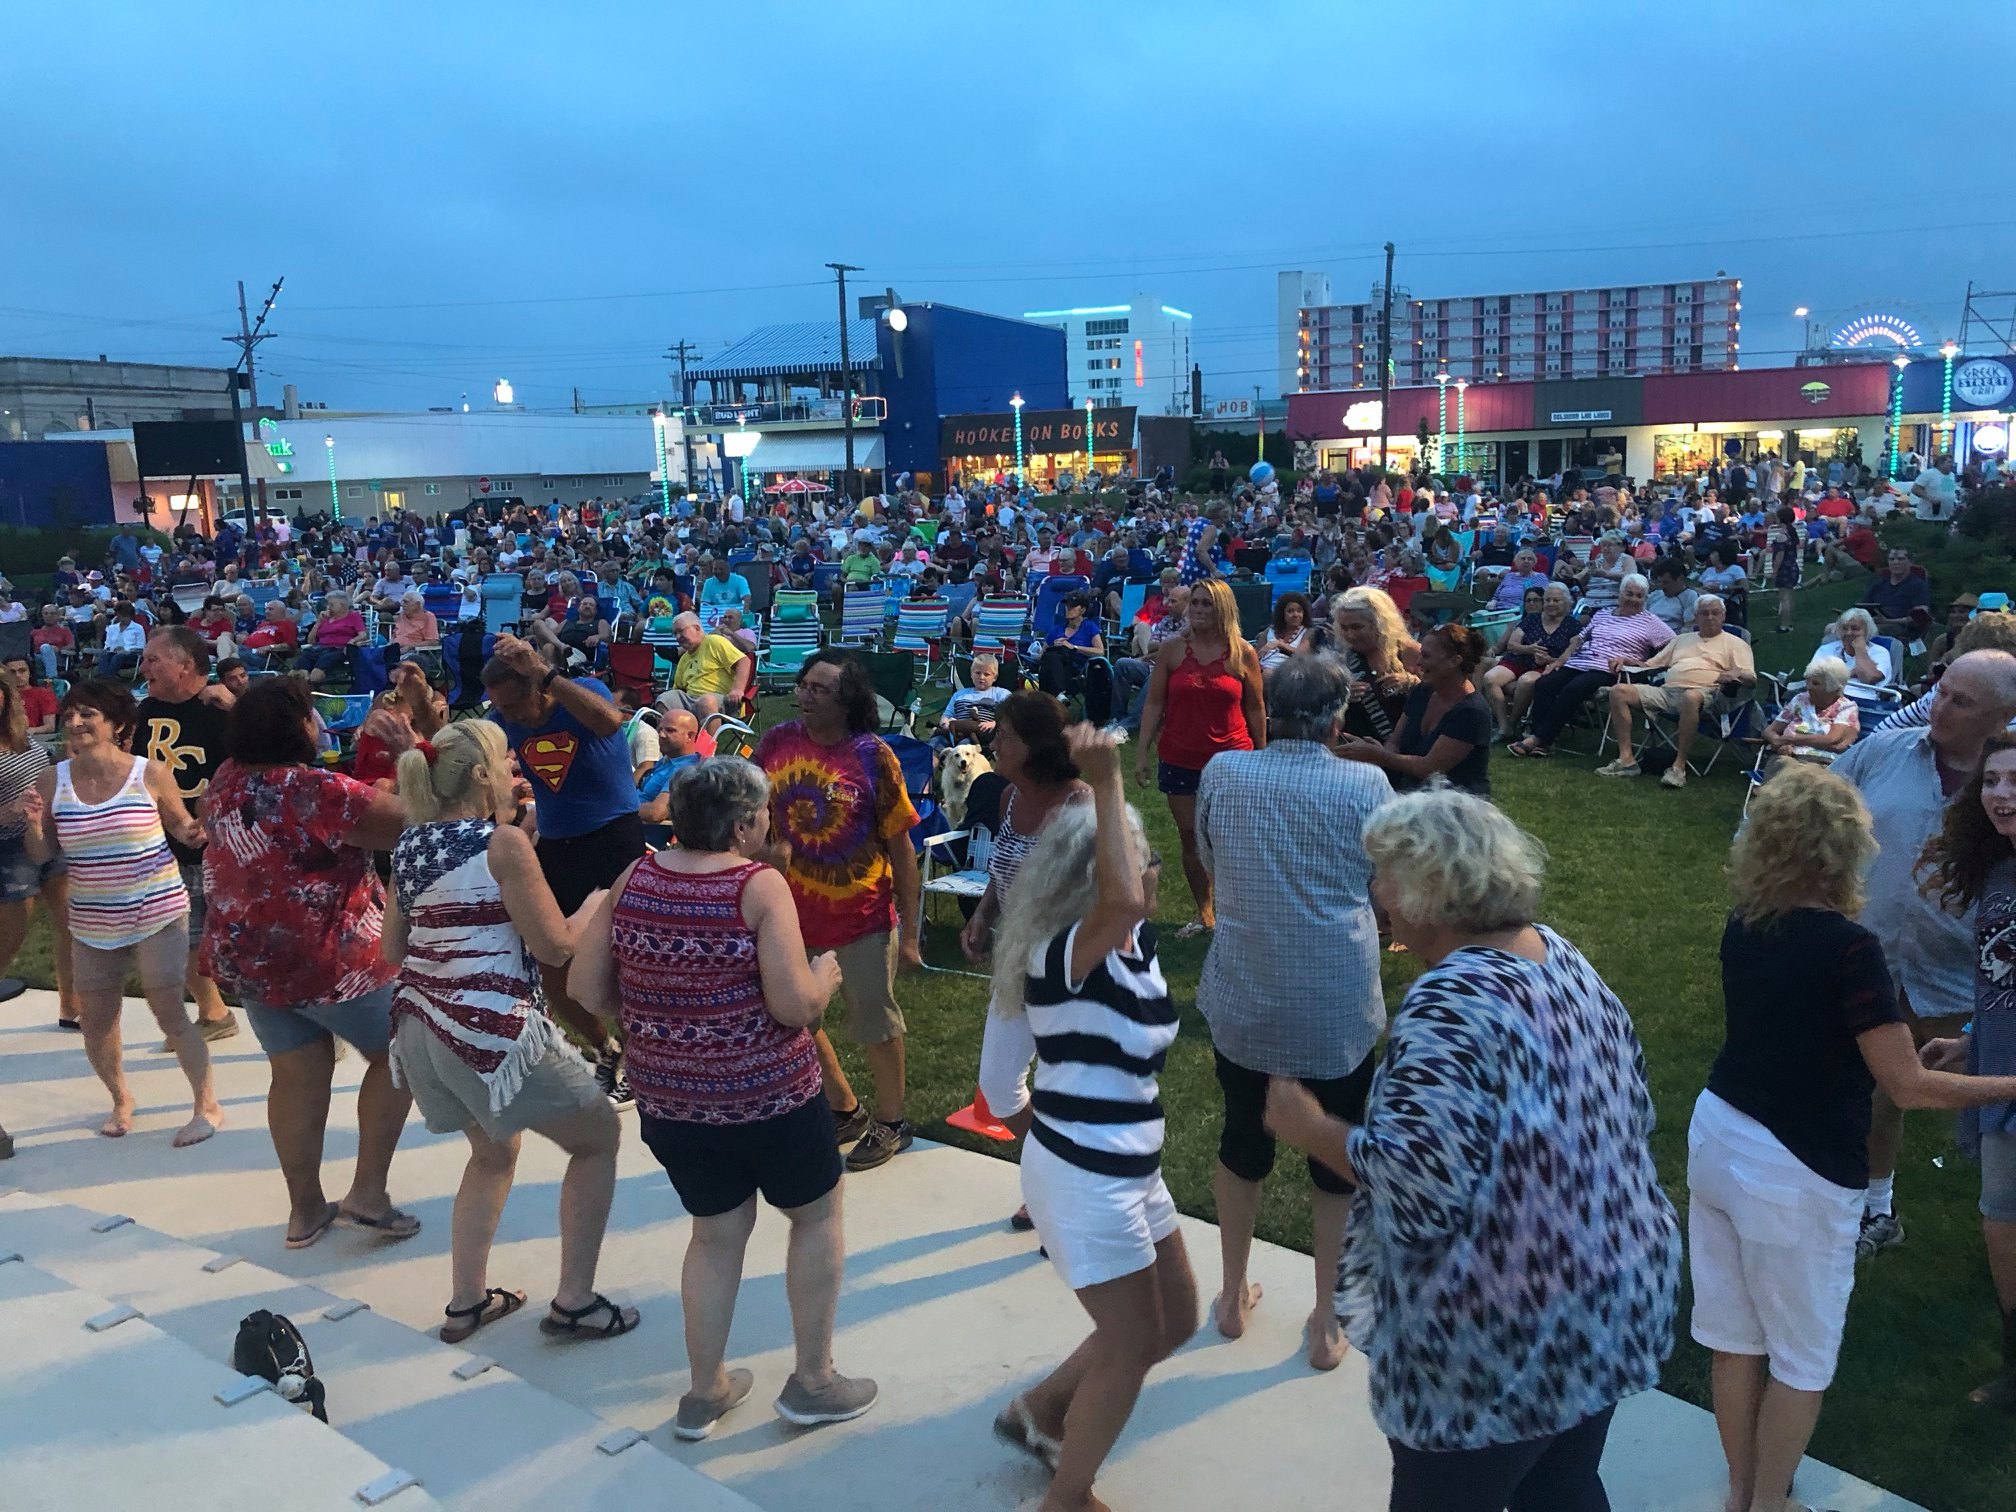 Free Music in the Plaza – The Chatterband